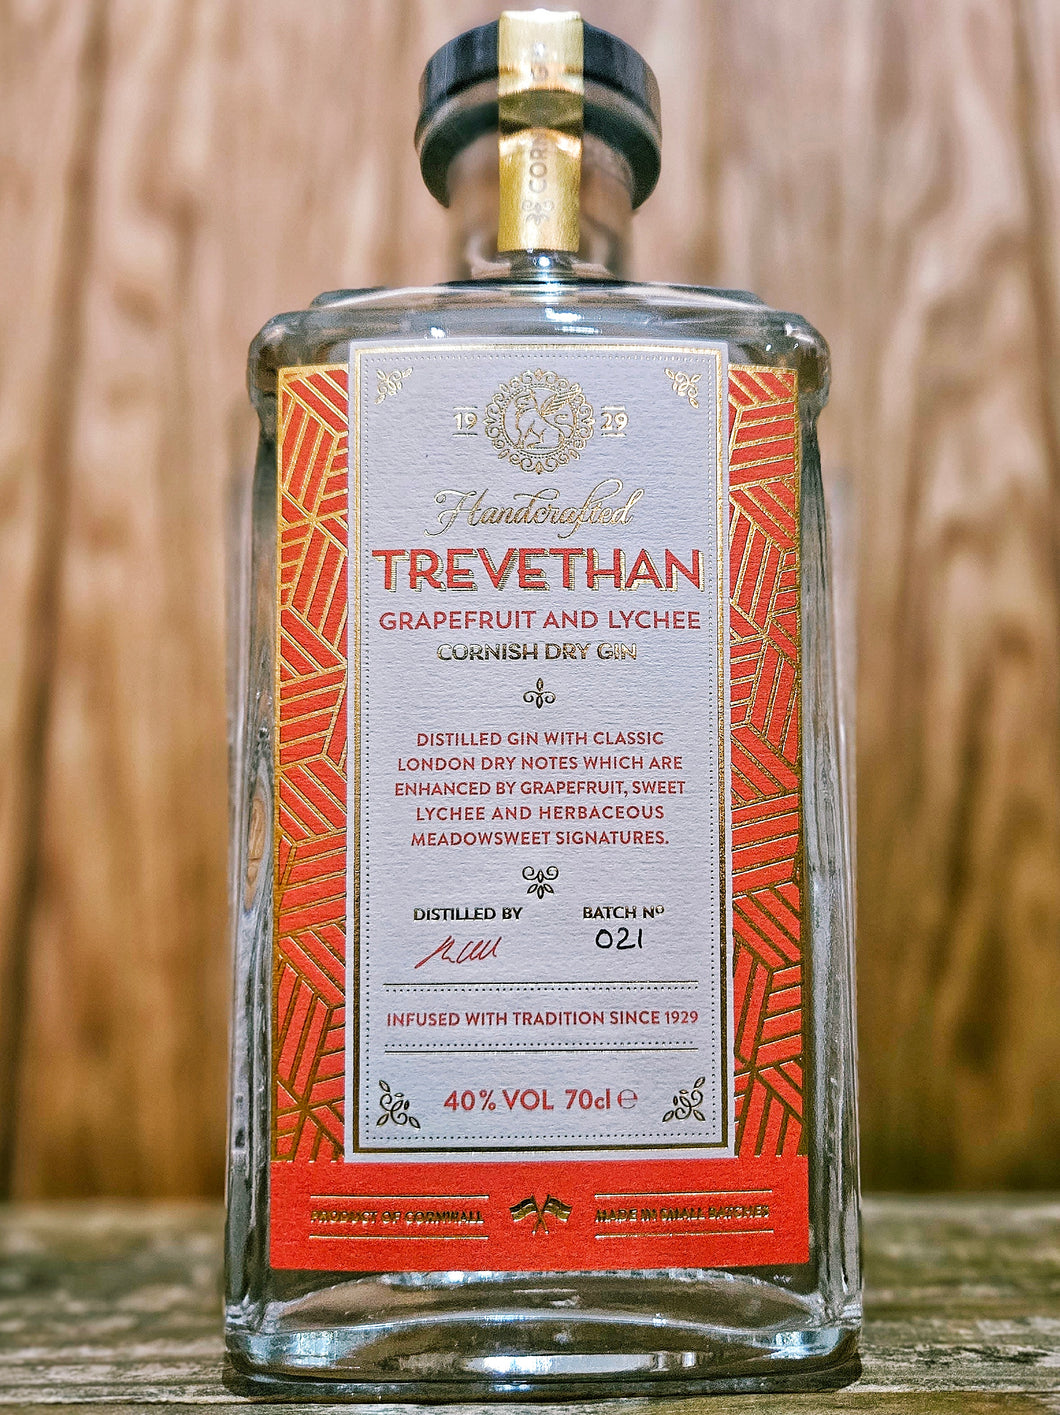 Trevethan - Grapefruit And Lychee Gin